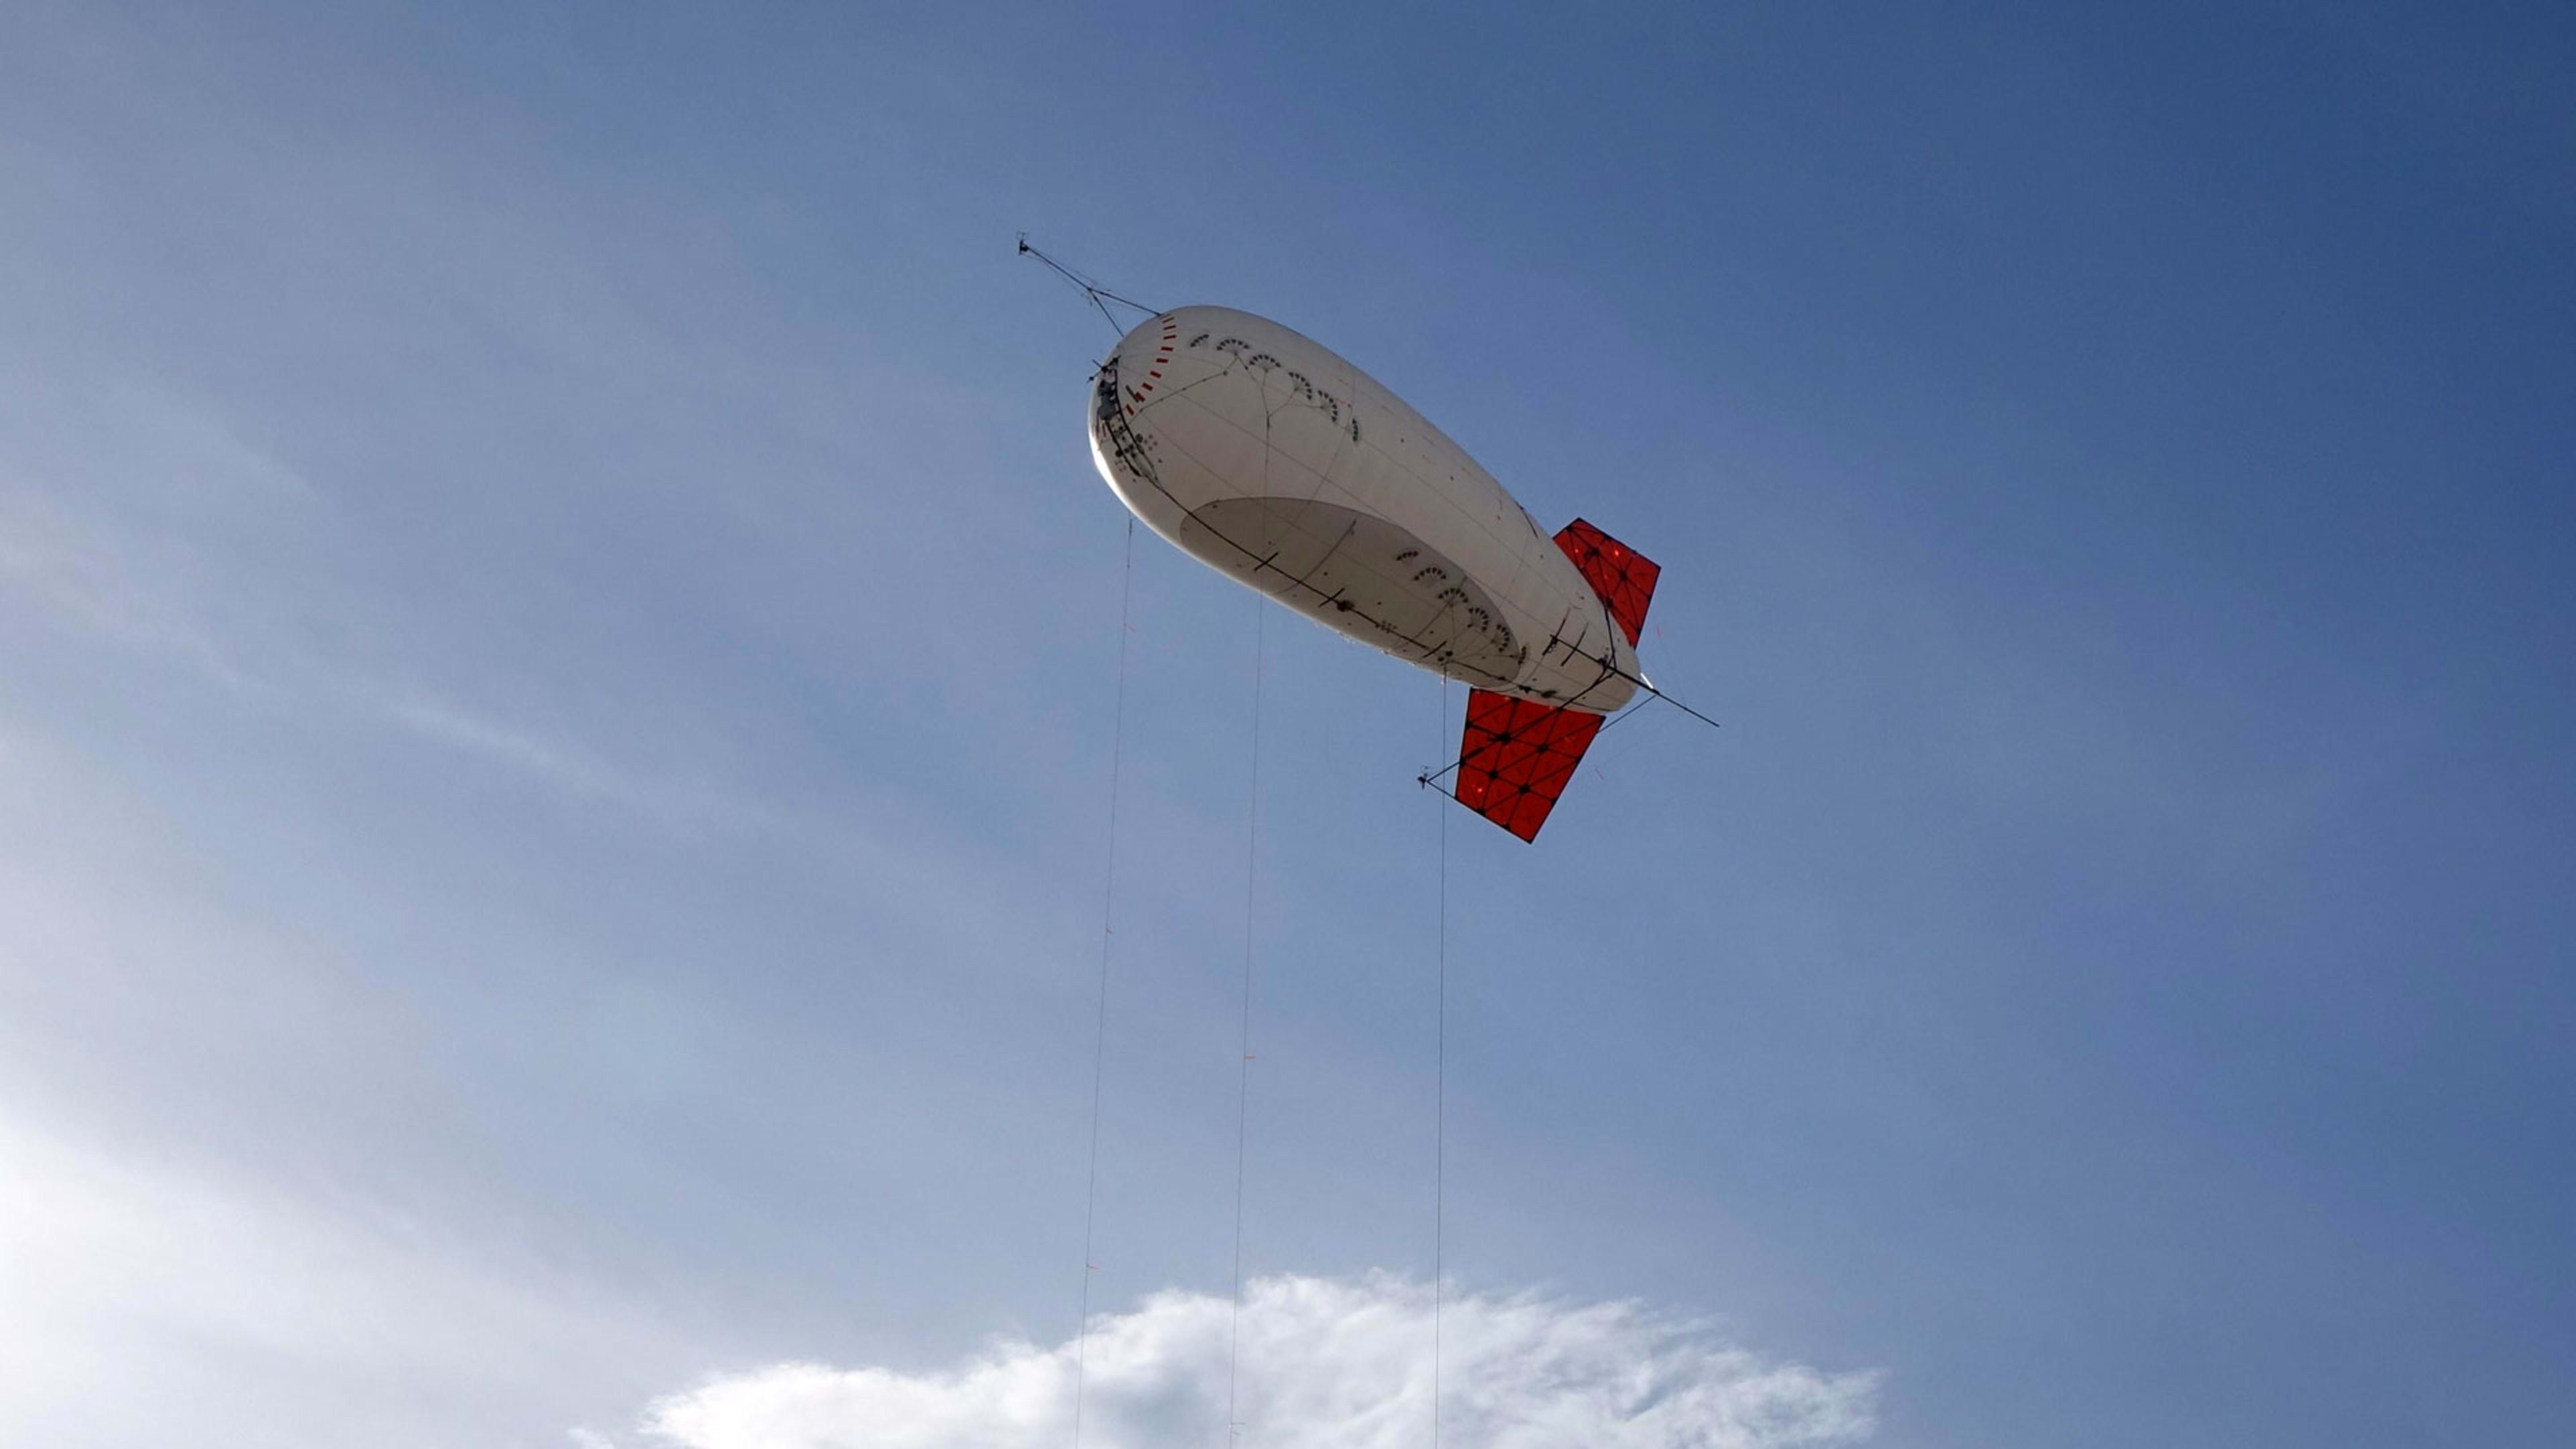 This blimp startup is taking on Google’s and Facebook’s flying internet projects